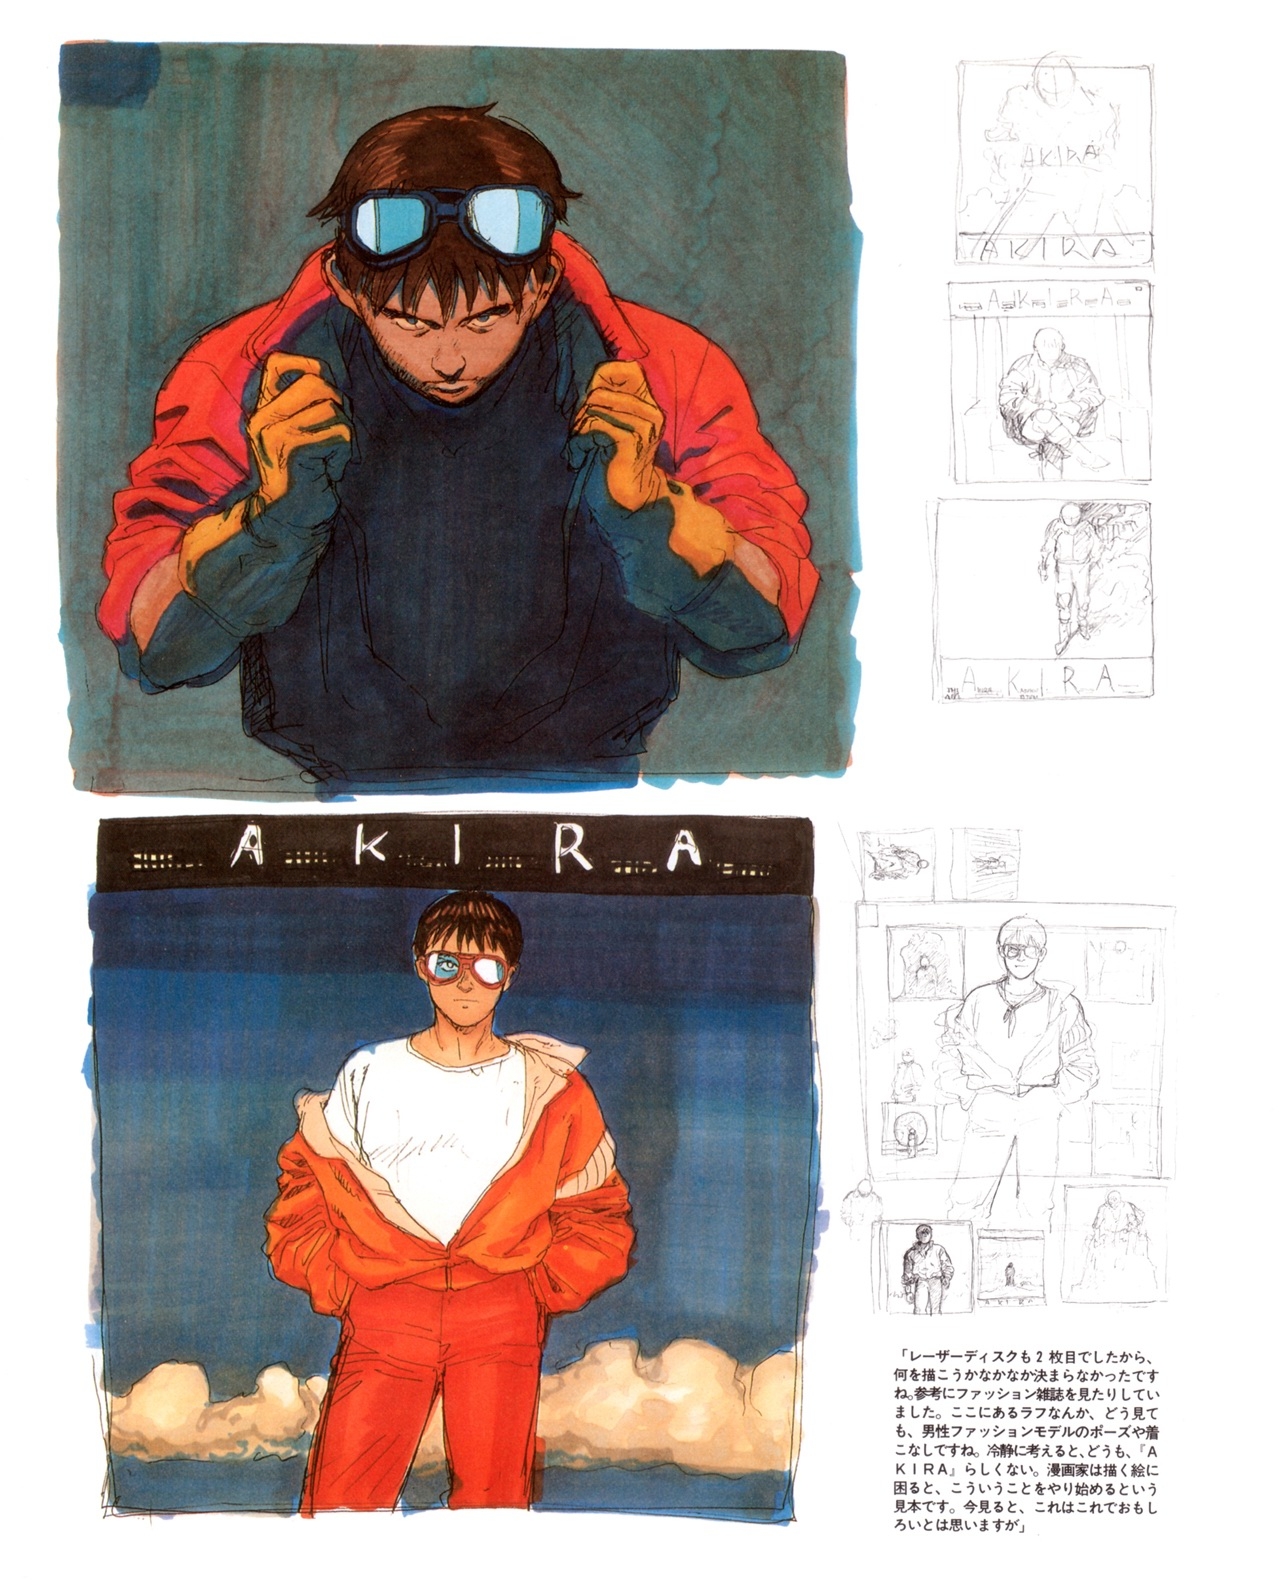 Akira club - The memory of Akira lives on in our hearts! 21